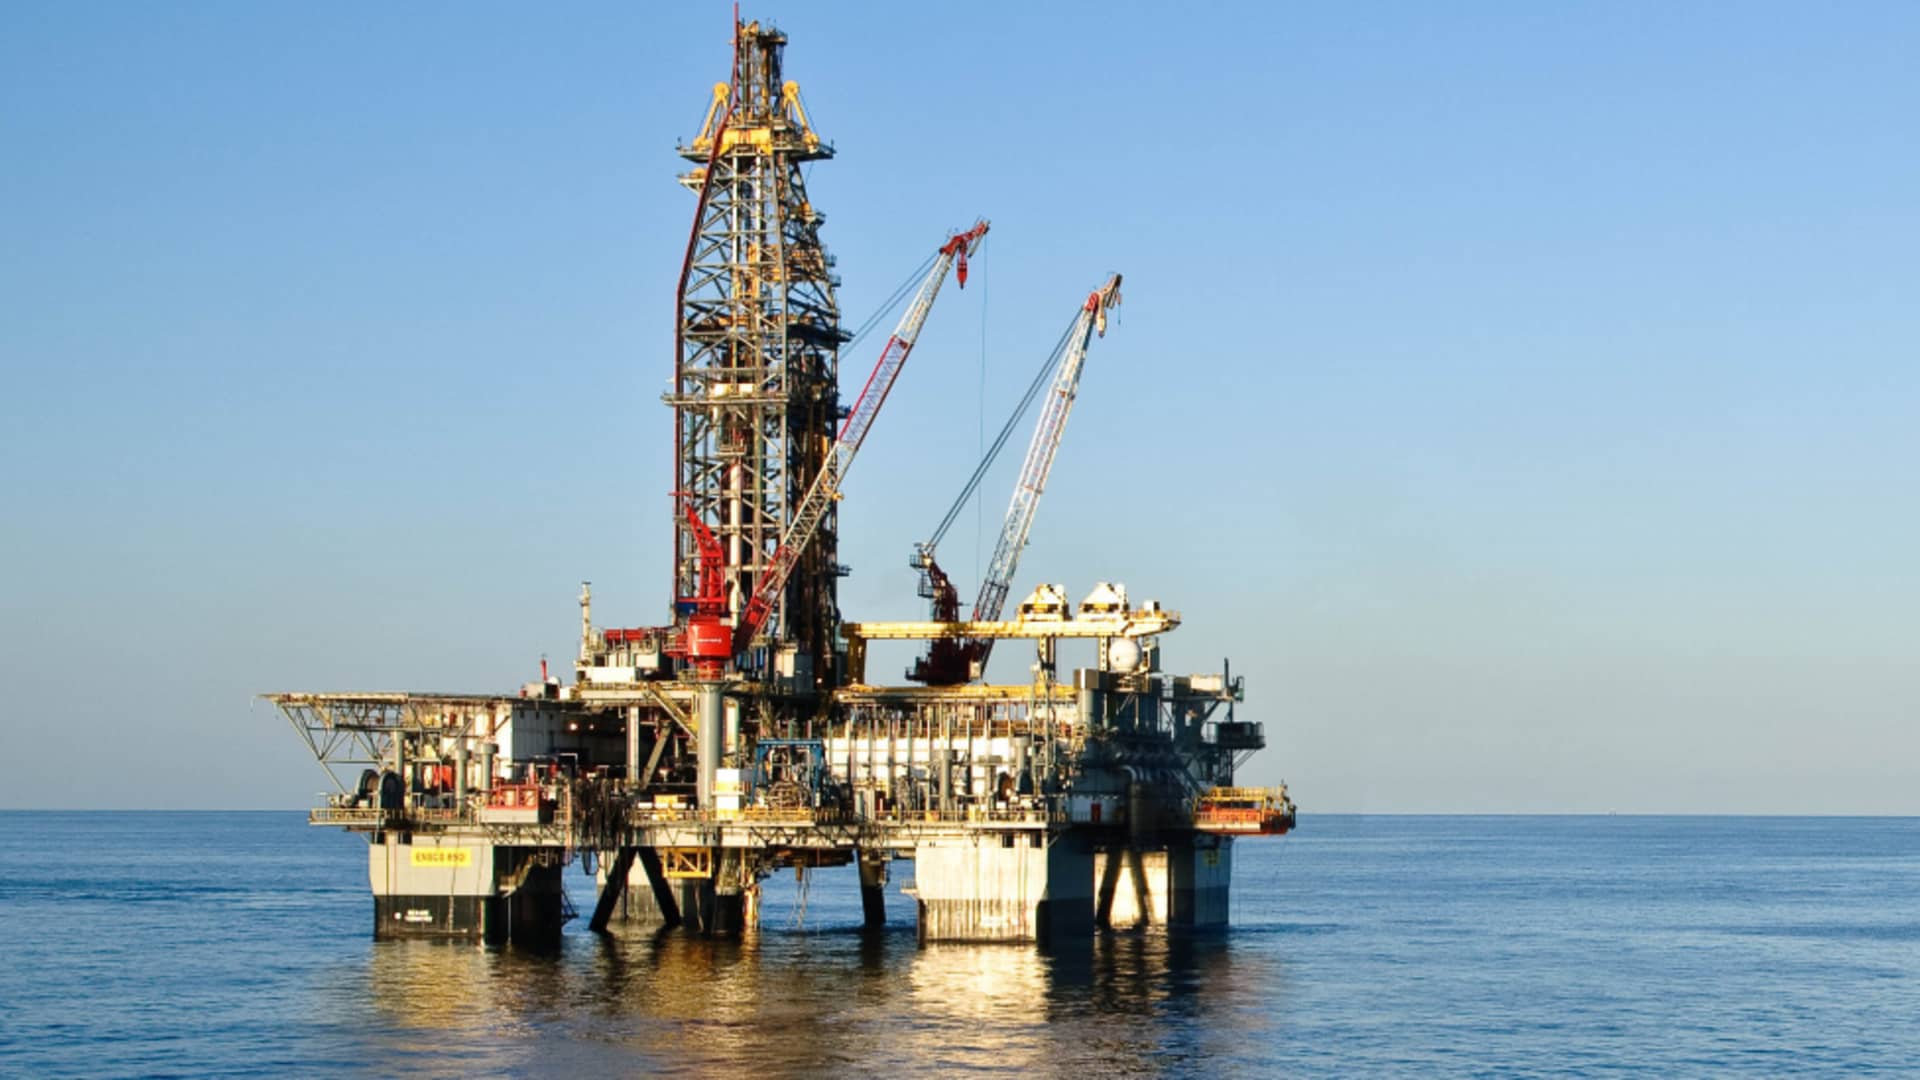 An 8500 series oil rig. Elon Musk's SpaceX bought a deepwater oil rig of this series last year and is converting it into a floating launchpad for rockets.